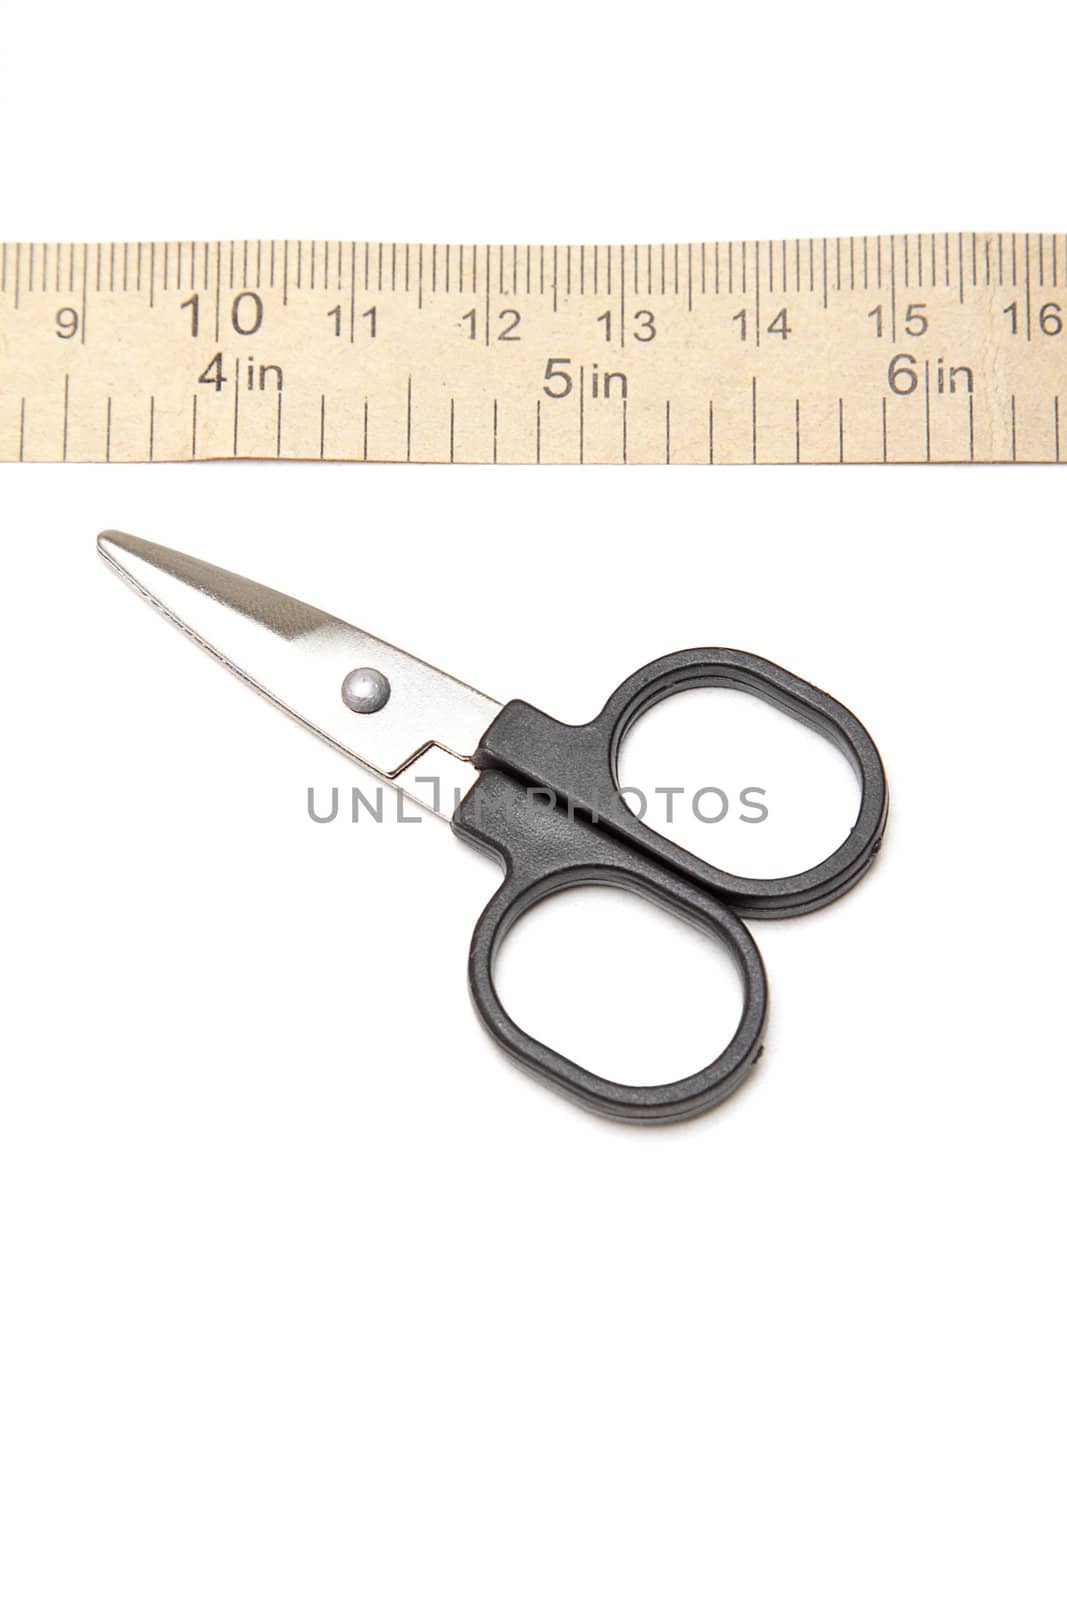 Paper measuring tape and scissors over white background